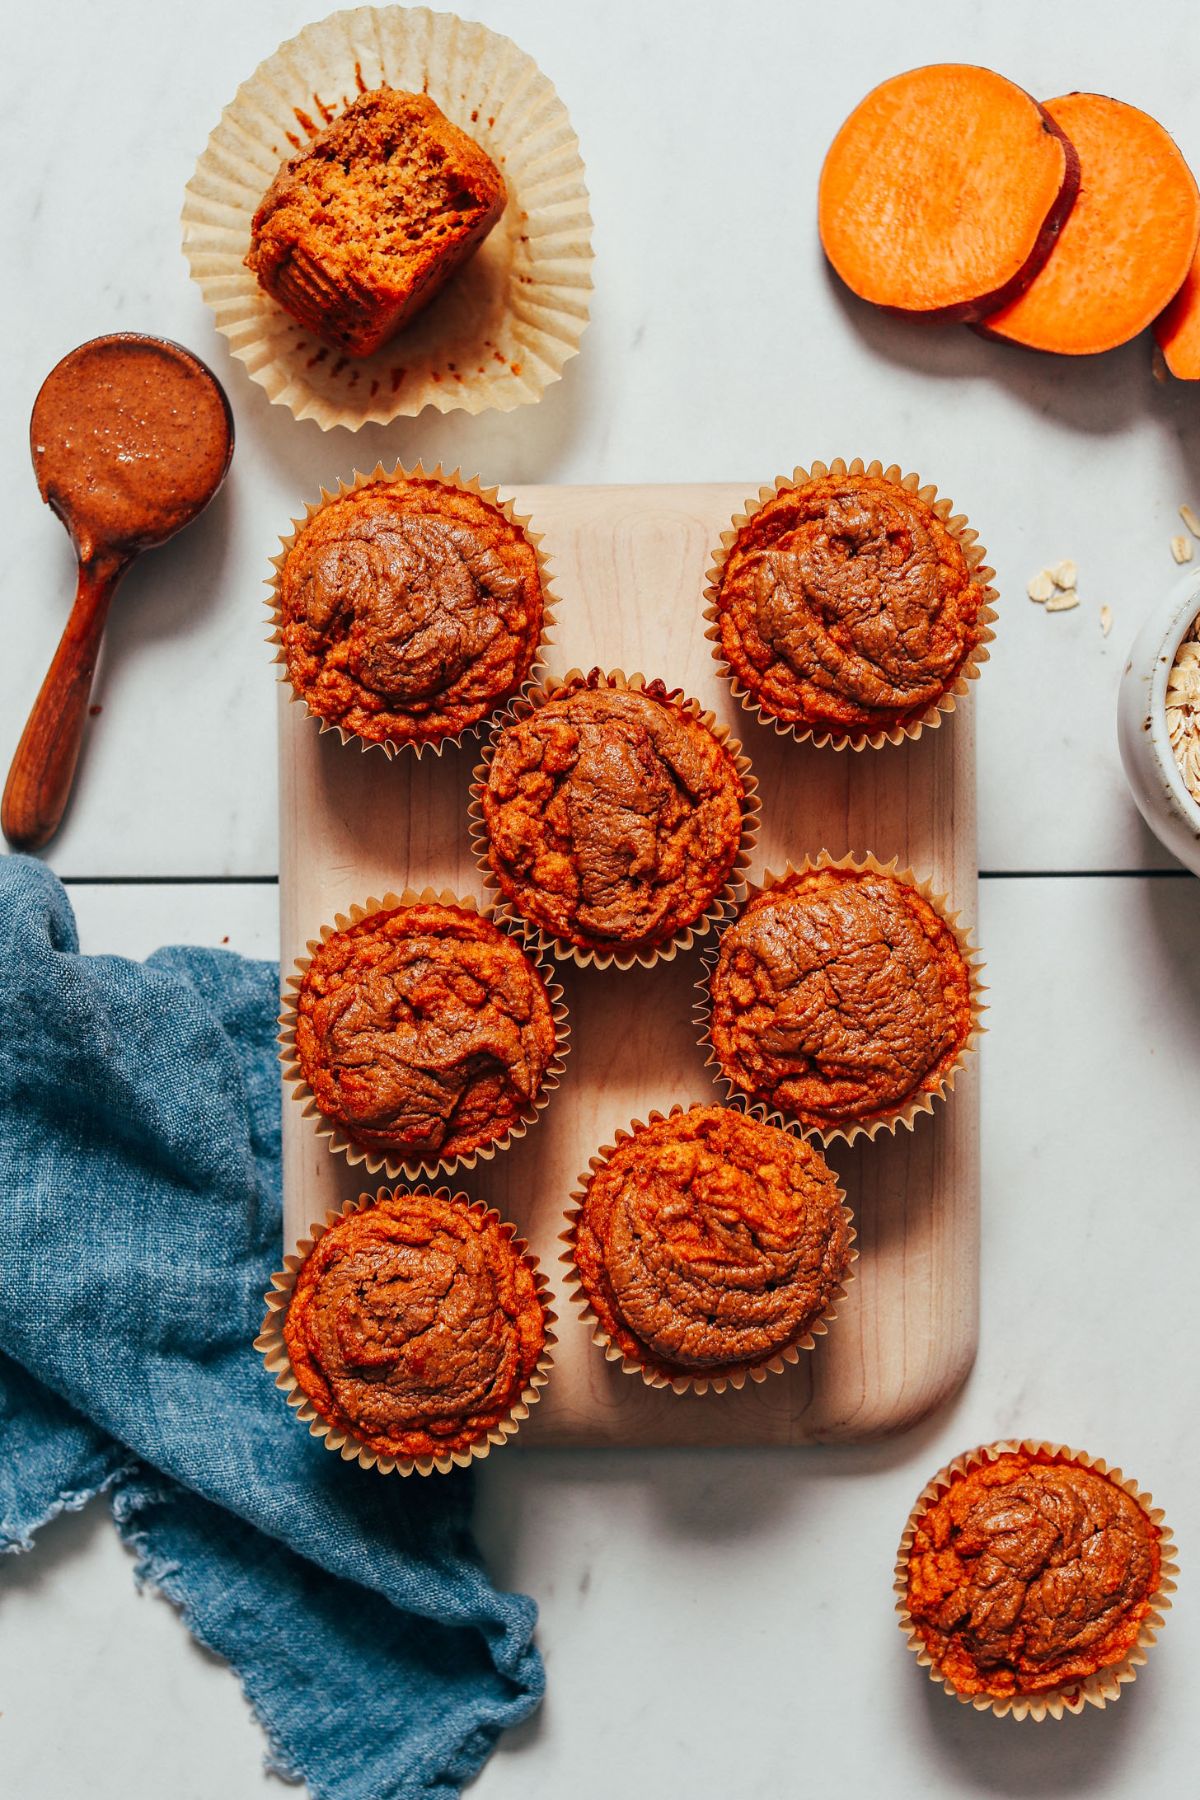 Delicious Fluffy Almond Butter Sweet Potato Muffins on a wooden cutting board.